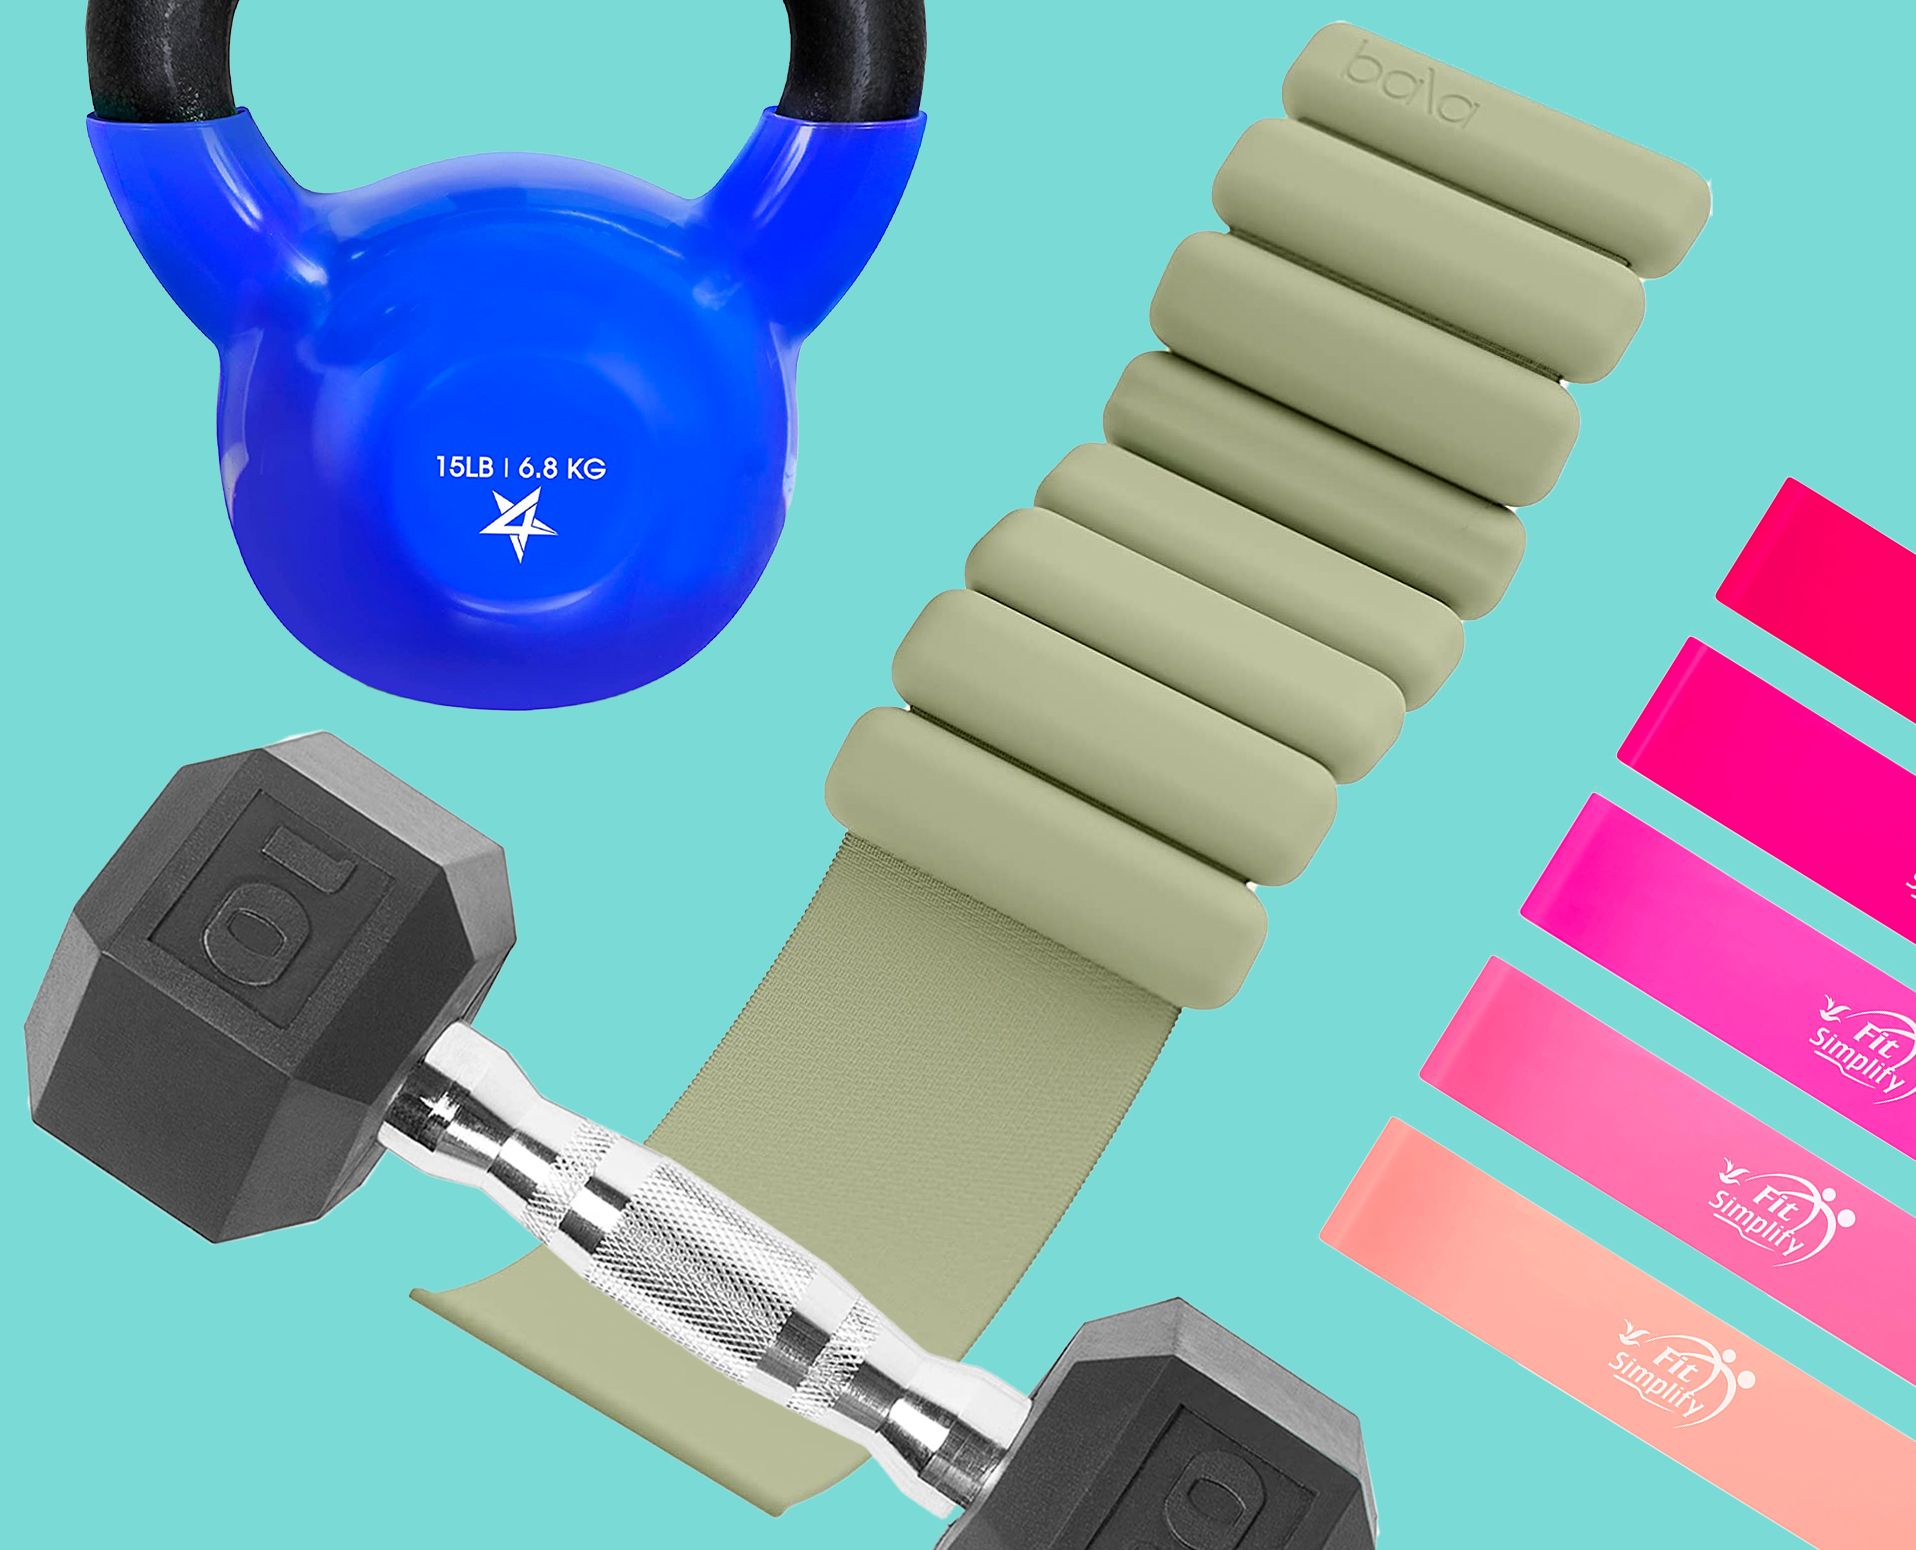 11 Must-Have At Home Workout Gear Picks from